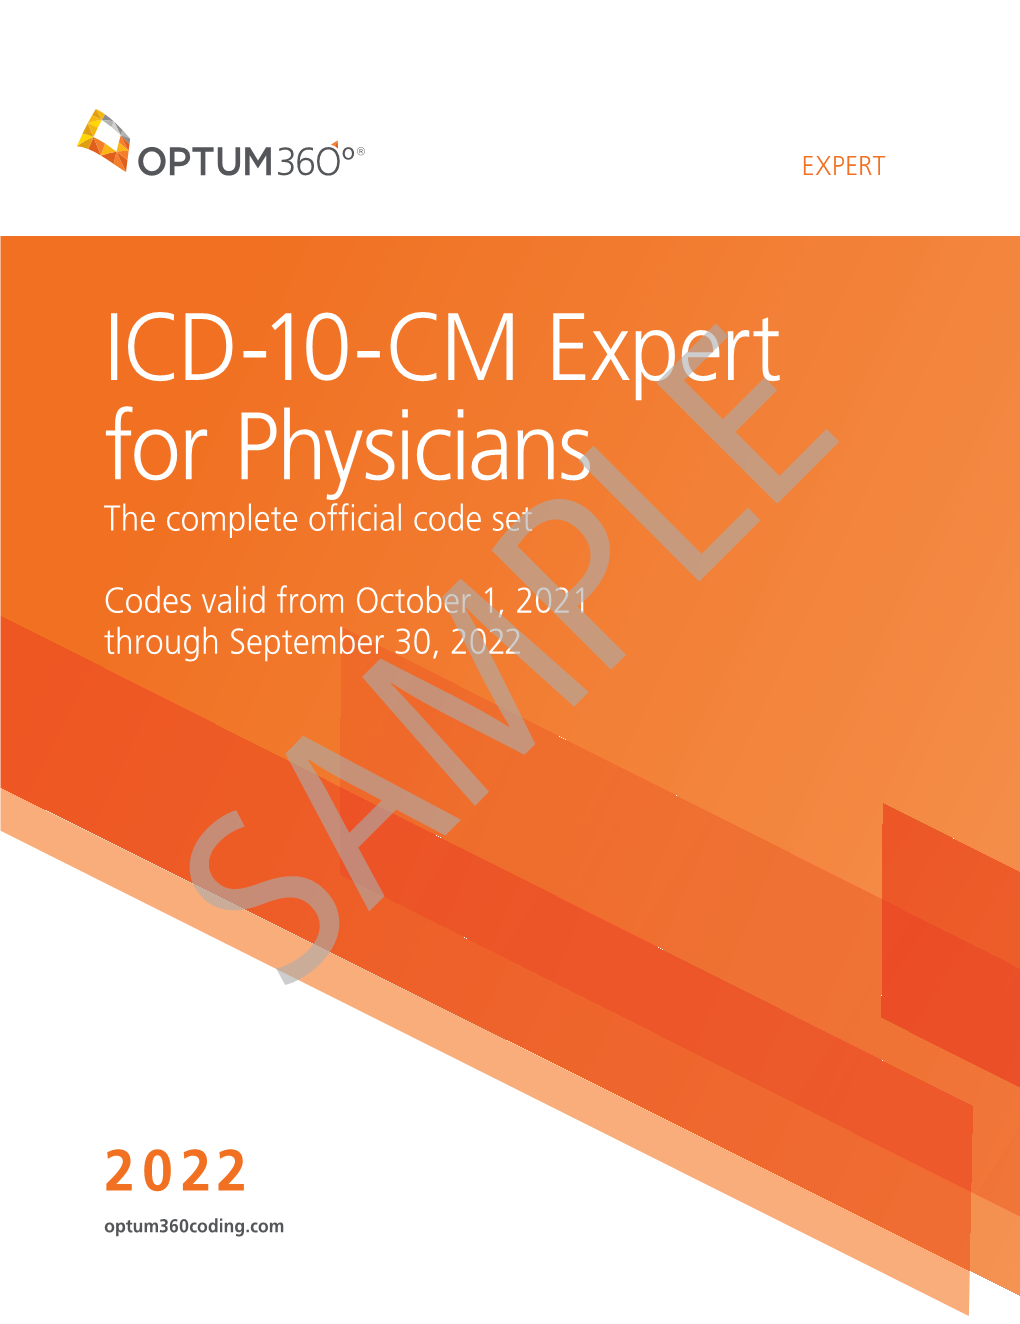 ICD-10-CM Expert for Physicians the Complete Ofﬁcial Code Set